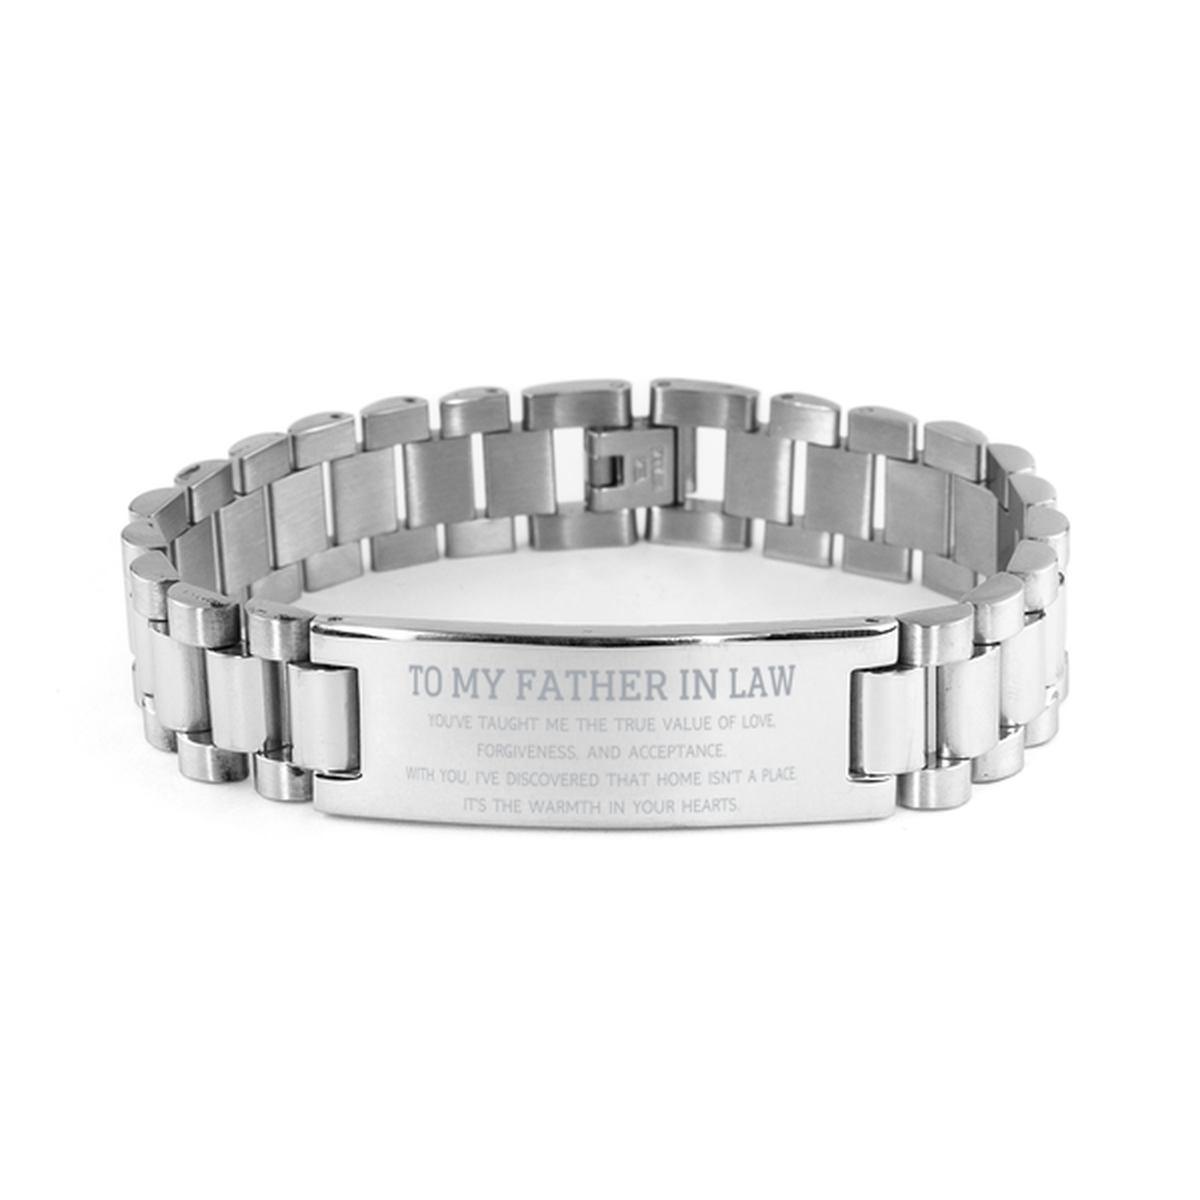 To My Father In Law Gifts, You've taught me the true value of love, Thank You Gifts For Father In Law, Birthday Ladder Stainless Steel Bracelet For Father In Law